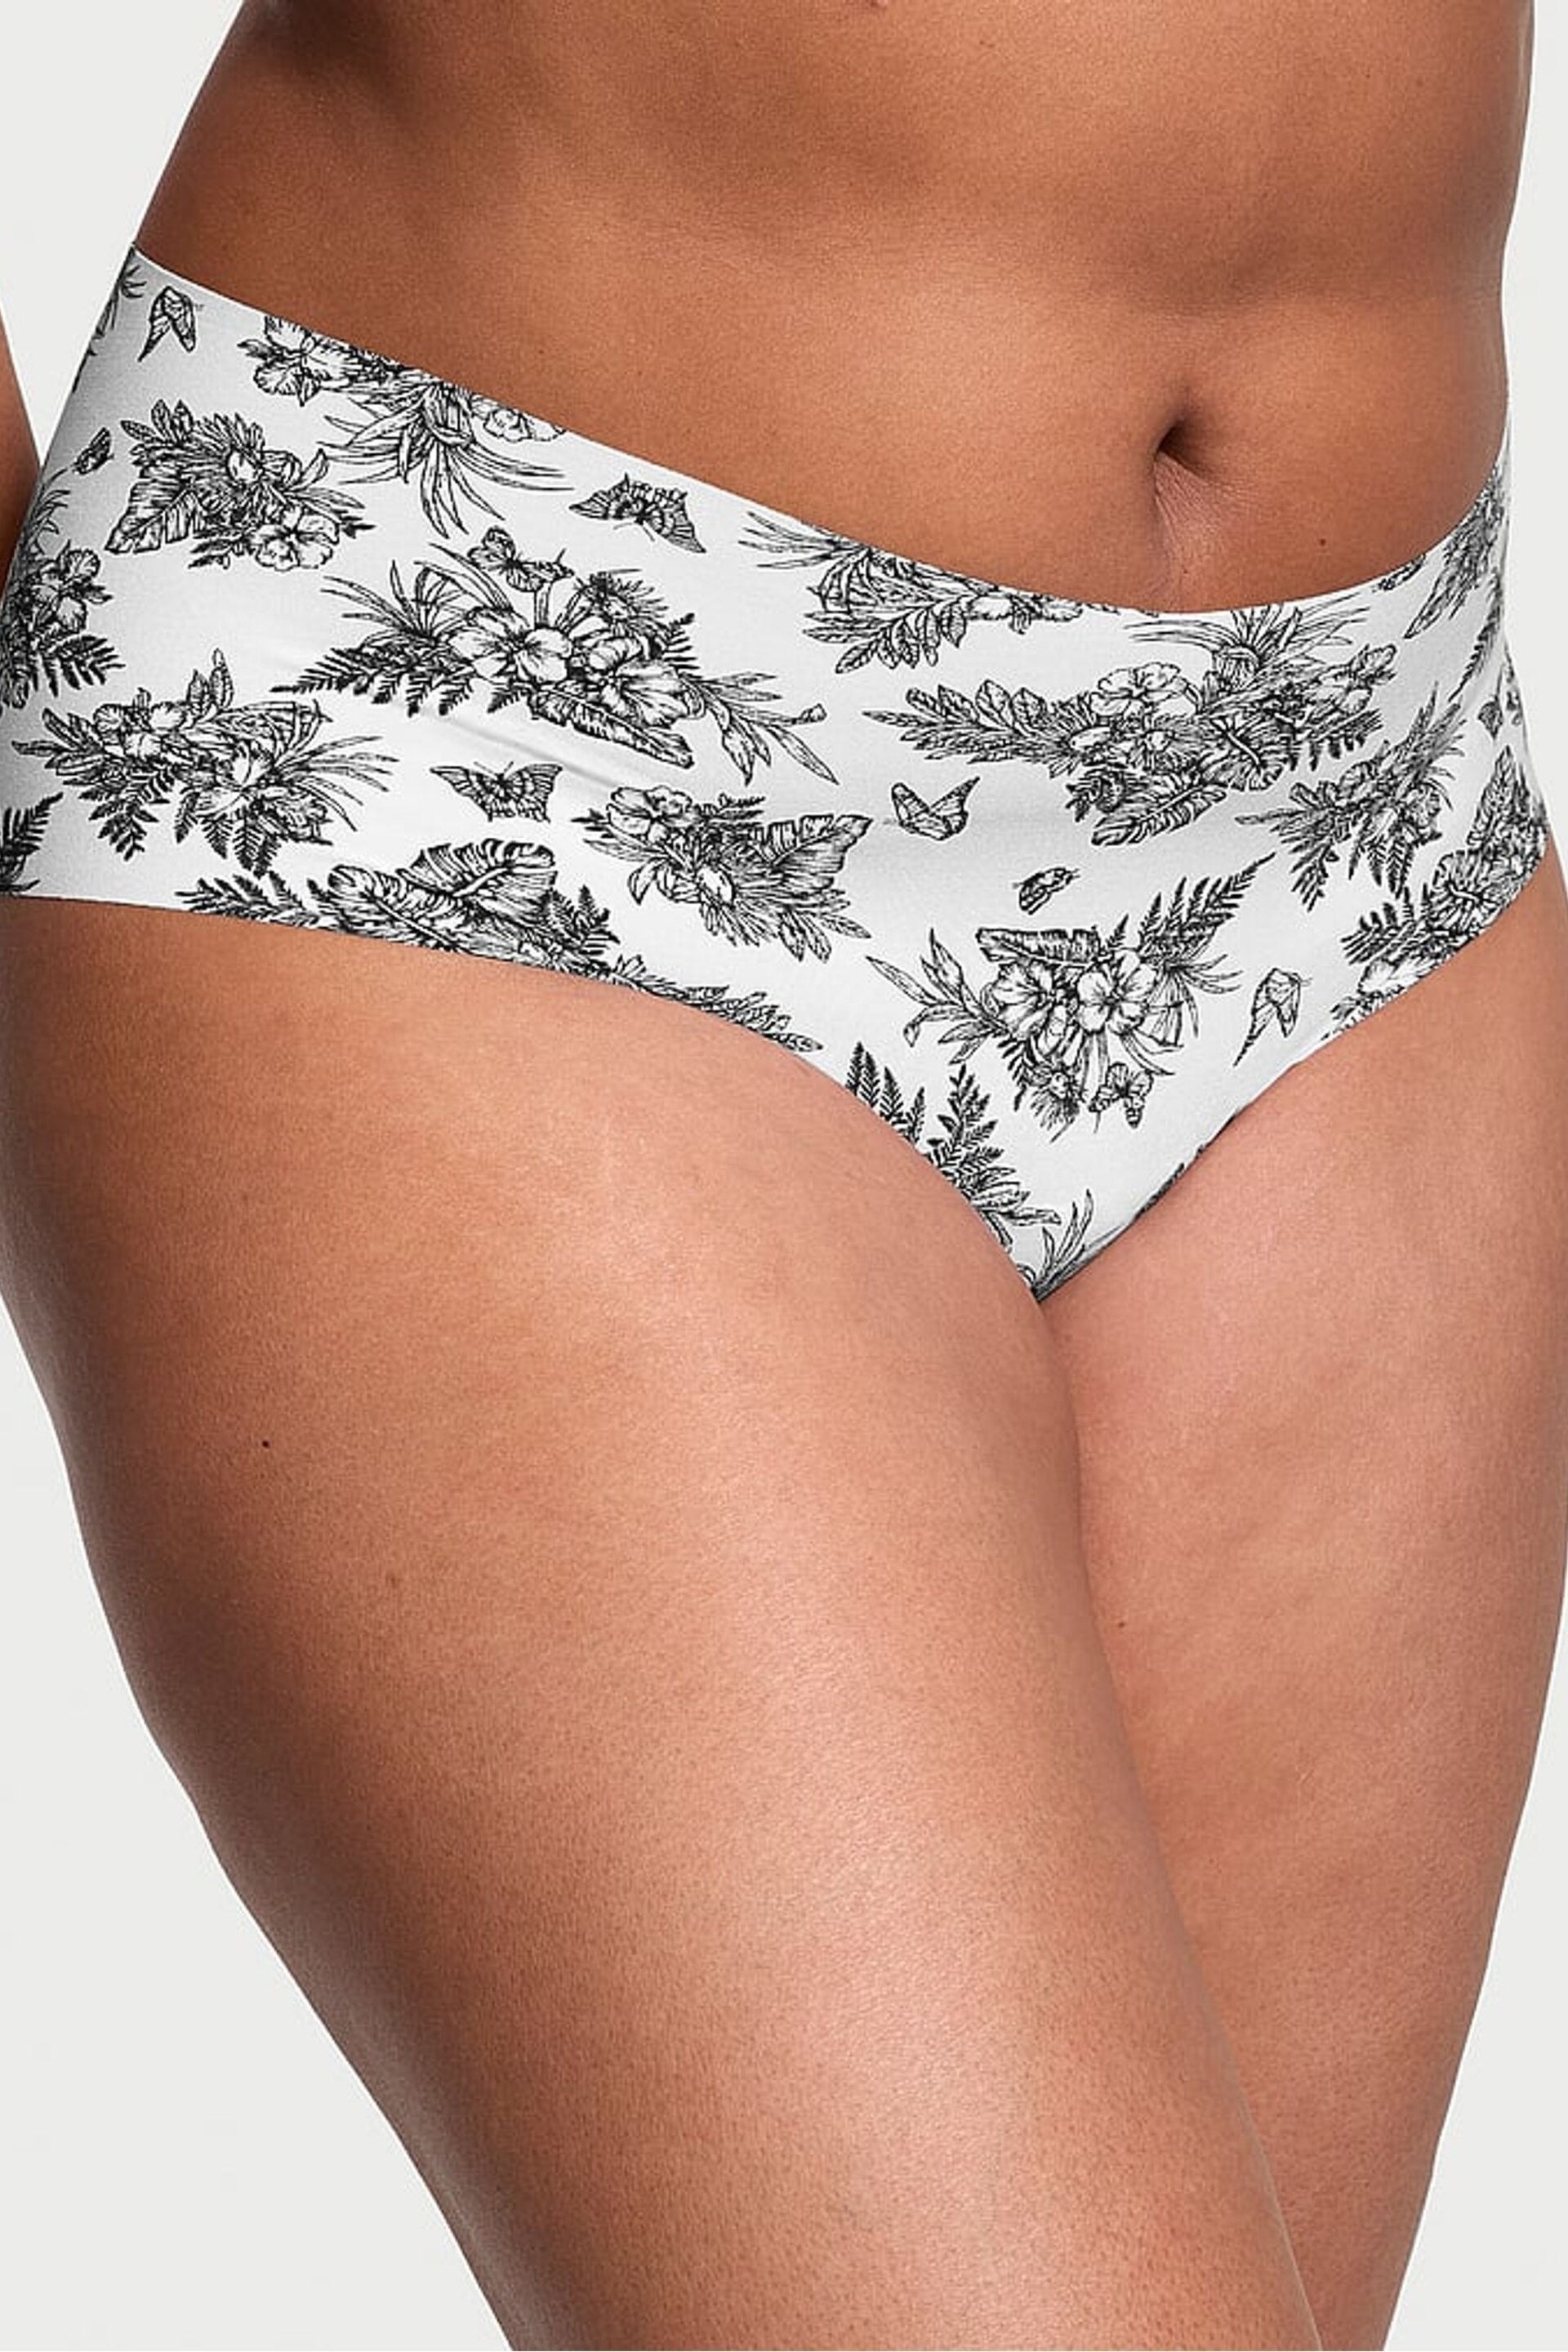 Victoria's Secret White Tropical Toile Cheeky Knickers - Image 1 of 3